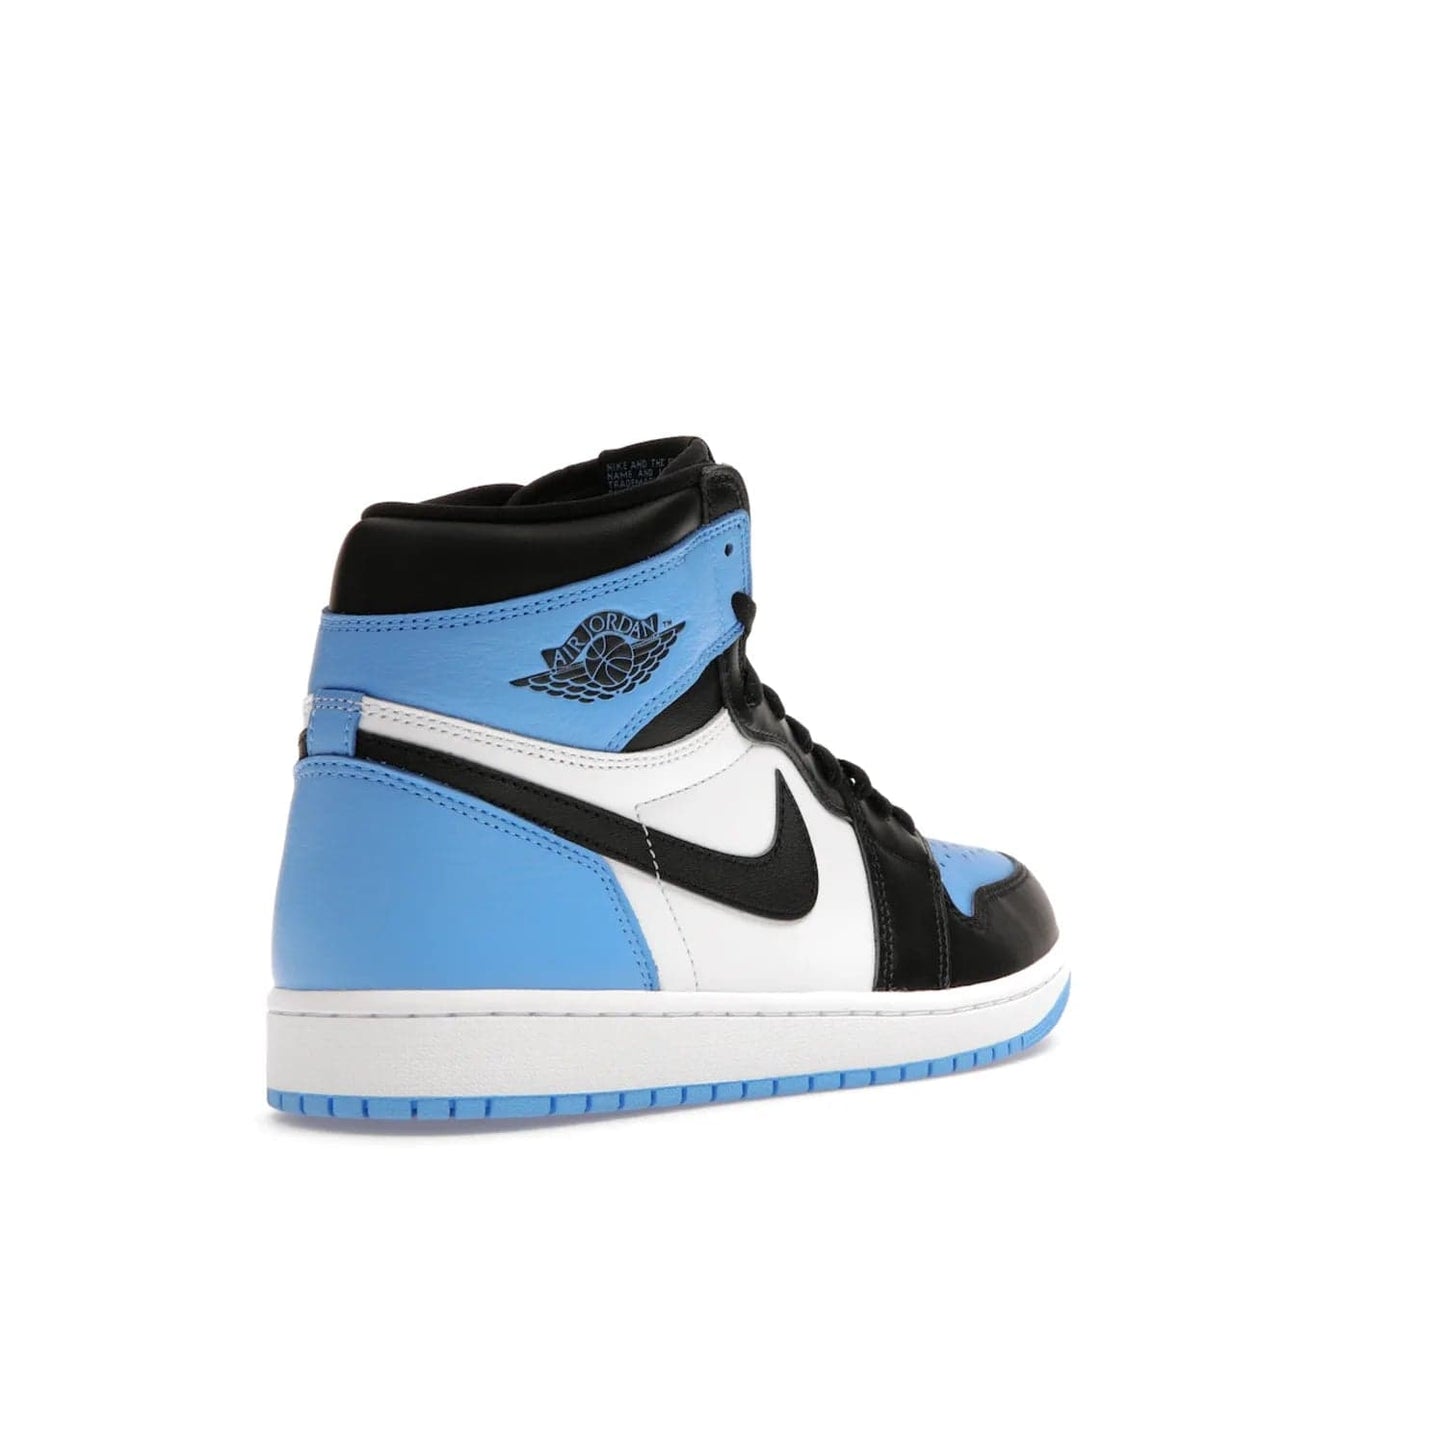 Jordan 1 Retro High OG UNC Toe - Image 32 - Only at www.BallersClubKickz.com - Jordan 1 High OG UNC Toe is a fashionable, high-quality sneaker featuring University Blue, Black White and White. Releasing July 22, 2023, it's the perfect pick up for sneakerheads.